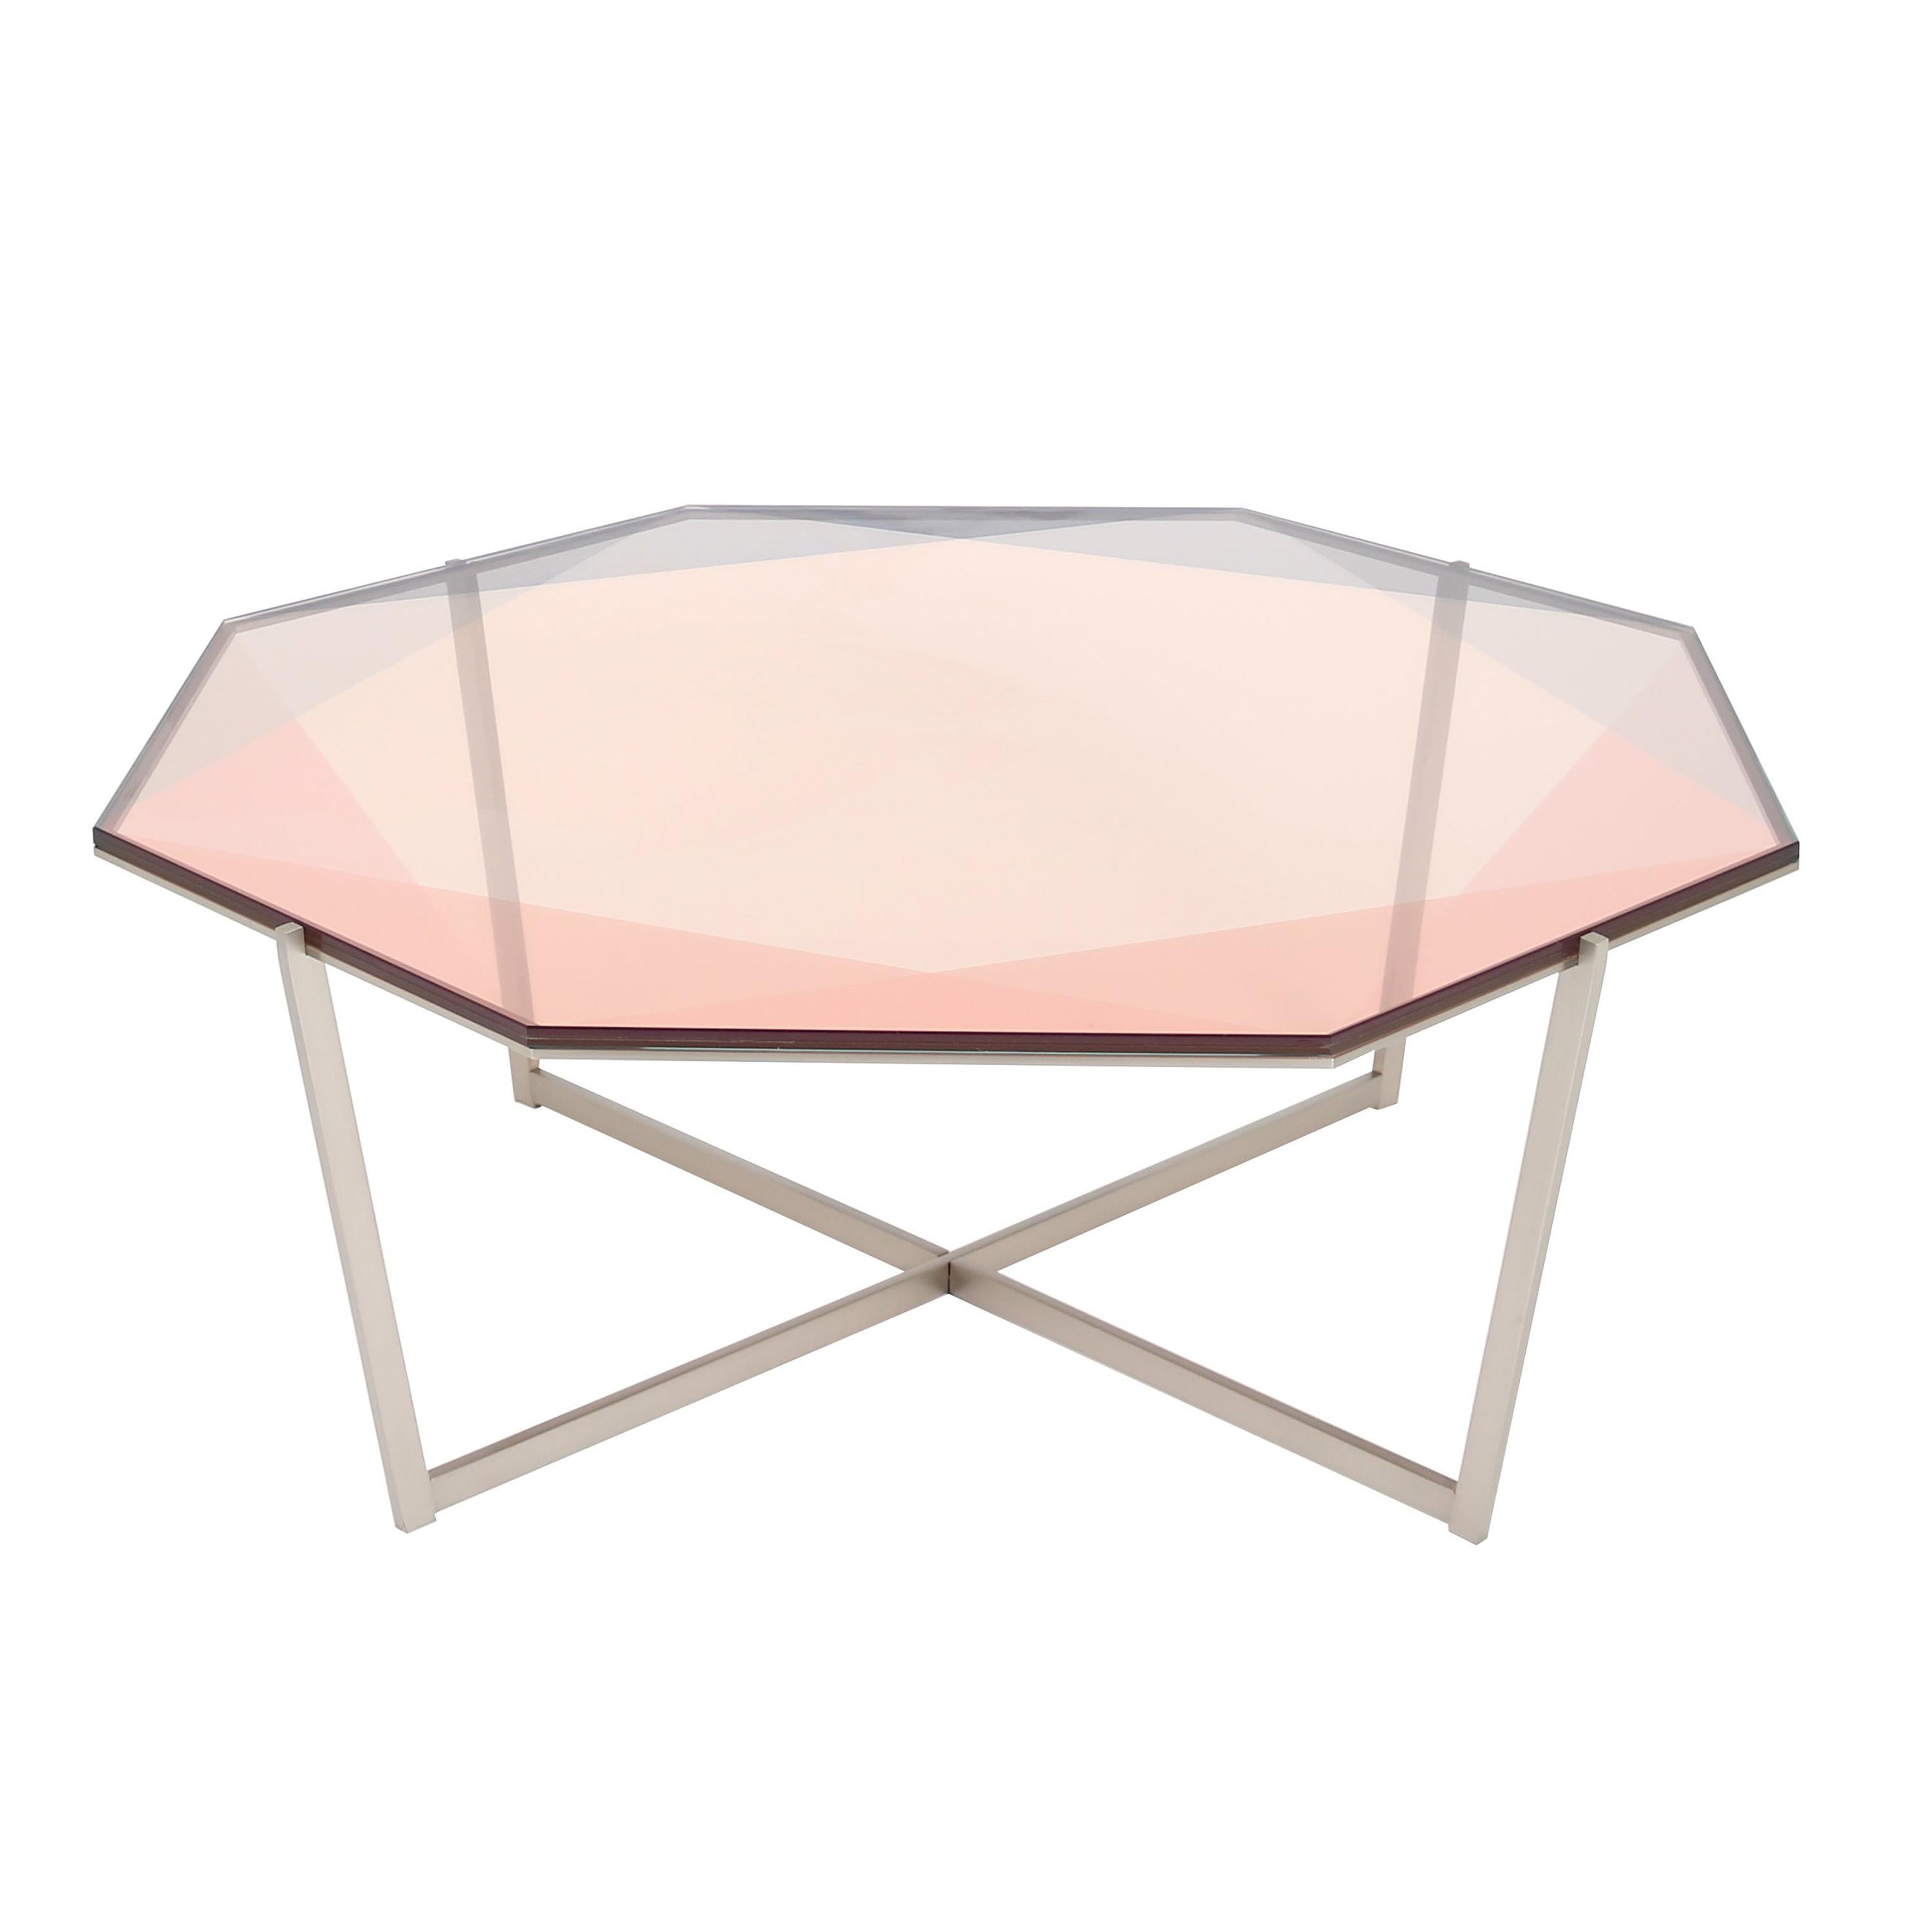 Gem Octagonal Coffee Table-Blush Glass with Stainless Steel Base by Debra Folz